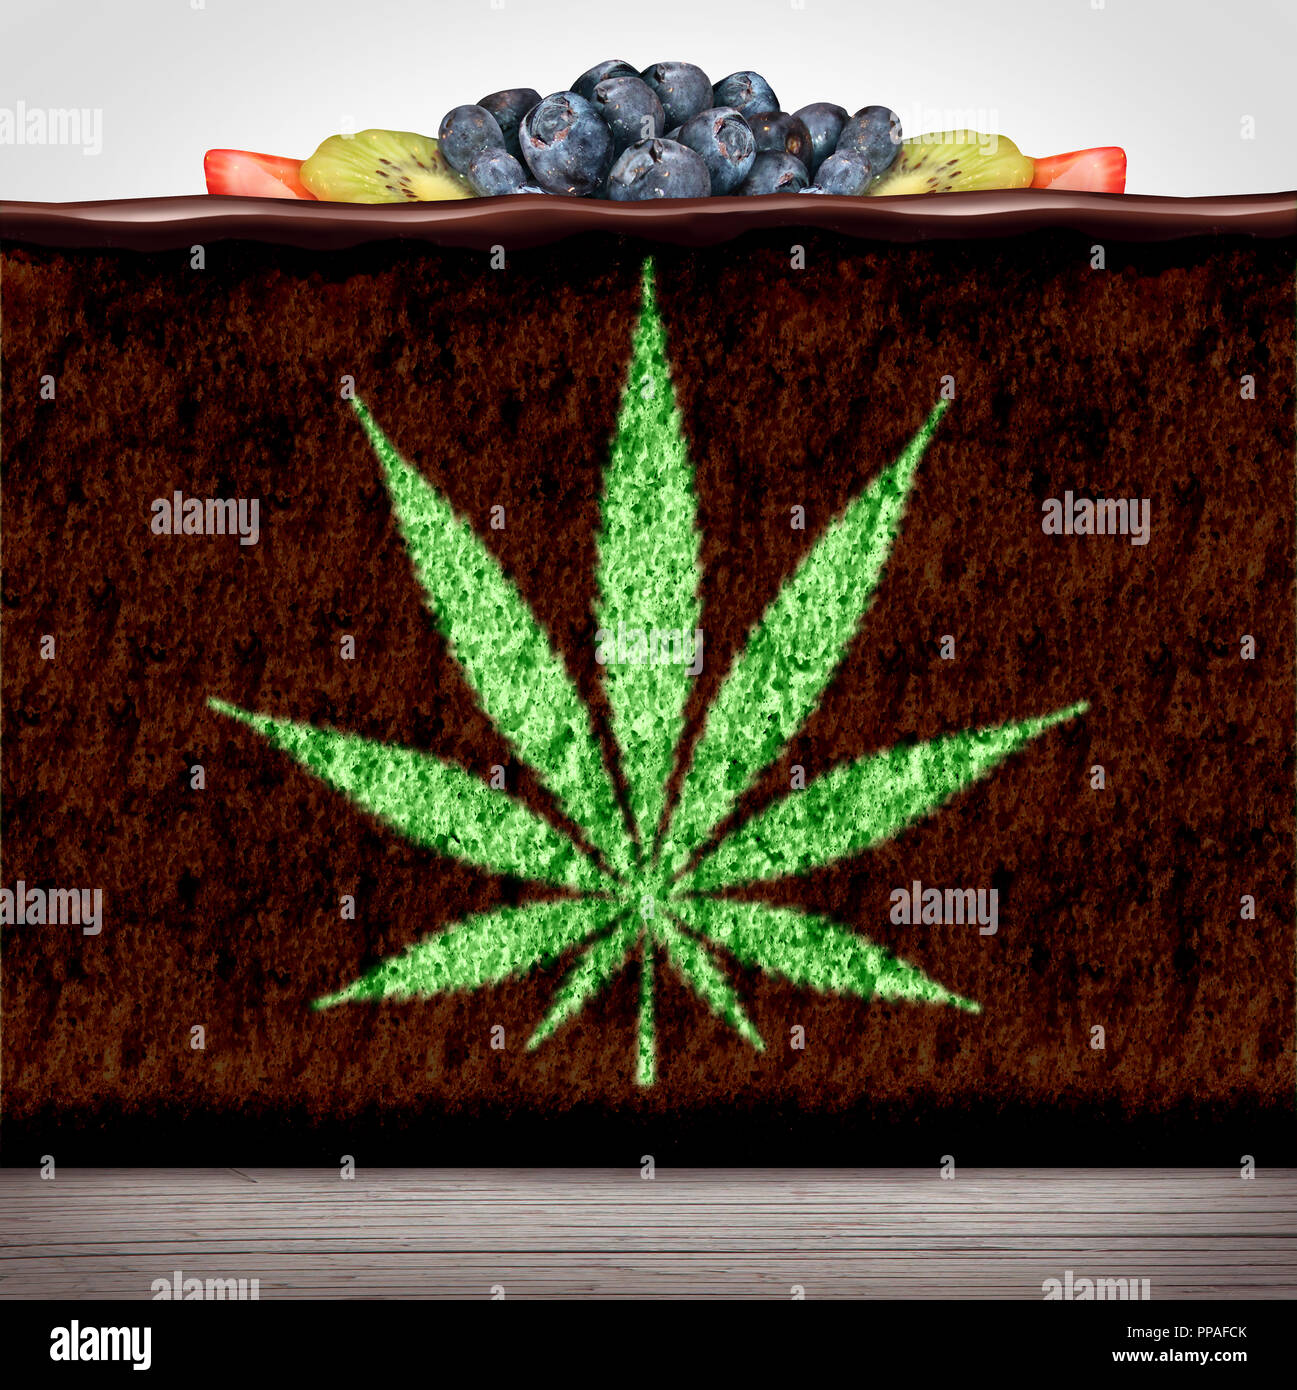 Cannabis edibles or marijuana edible brownie or cake snack with a leaf representing hemp baked good ,herbalfood infused with psychoactive medicinal. Stock Photo